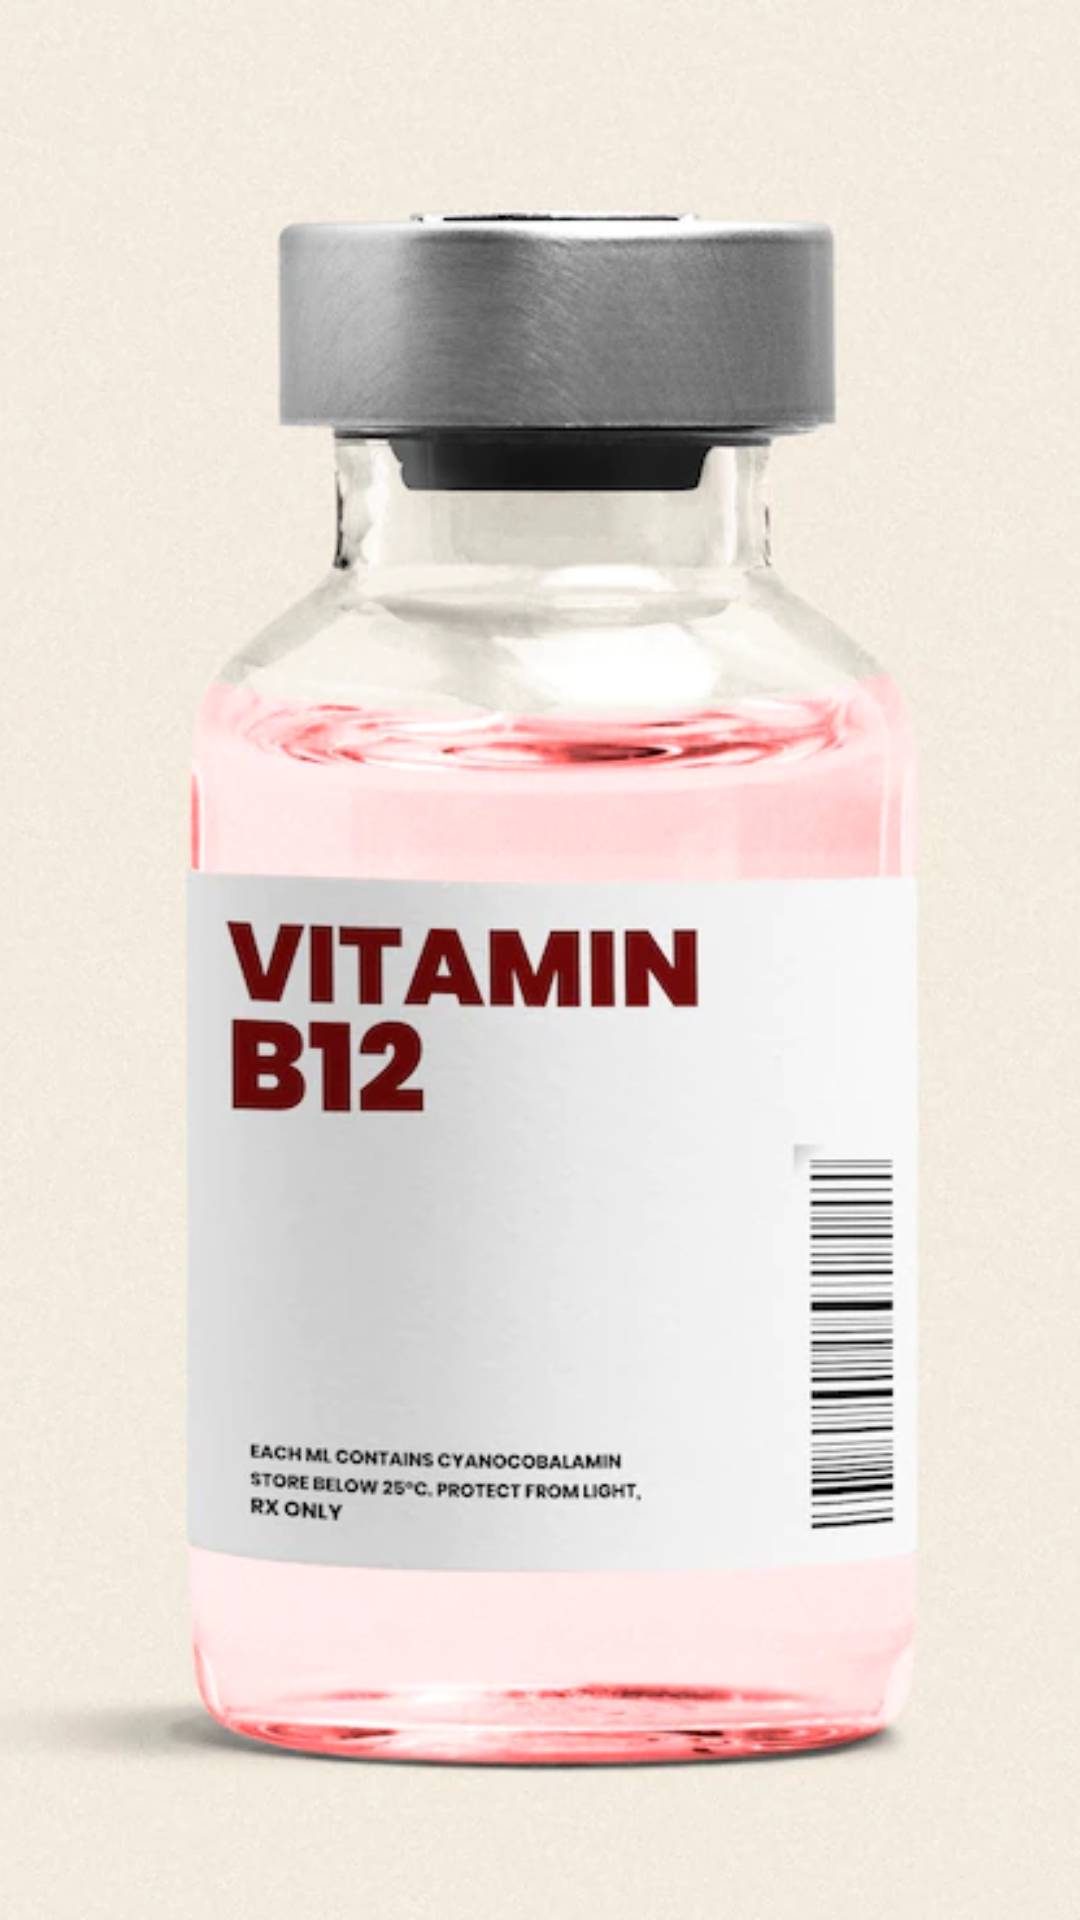 Vitamin B12 Deficiency: Symptoms and causes you should know